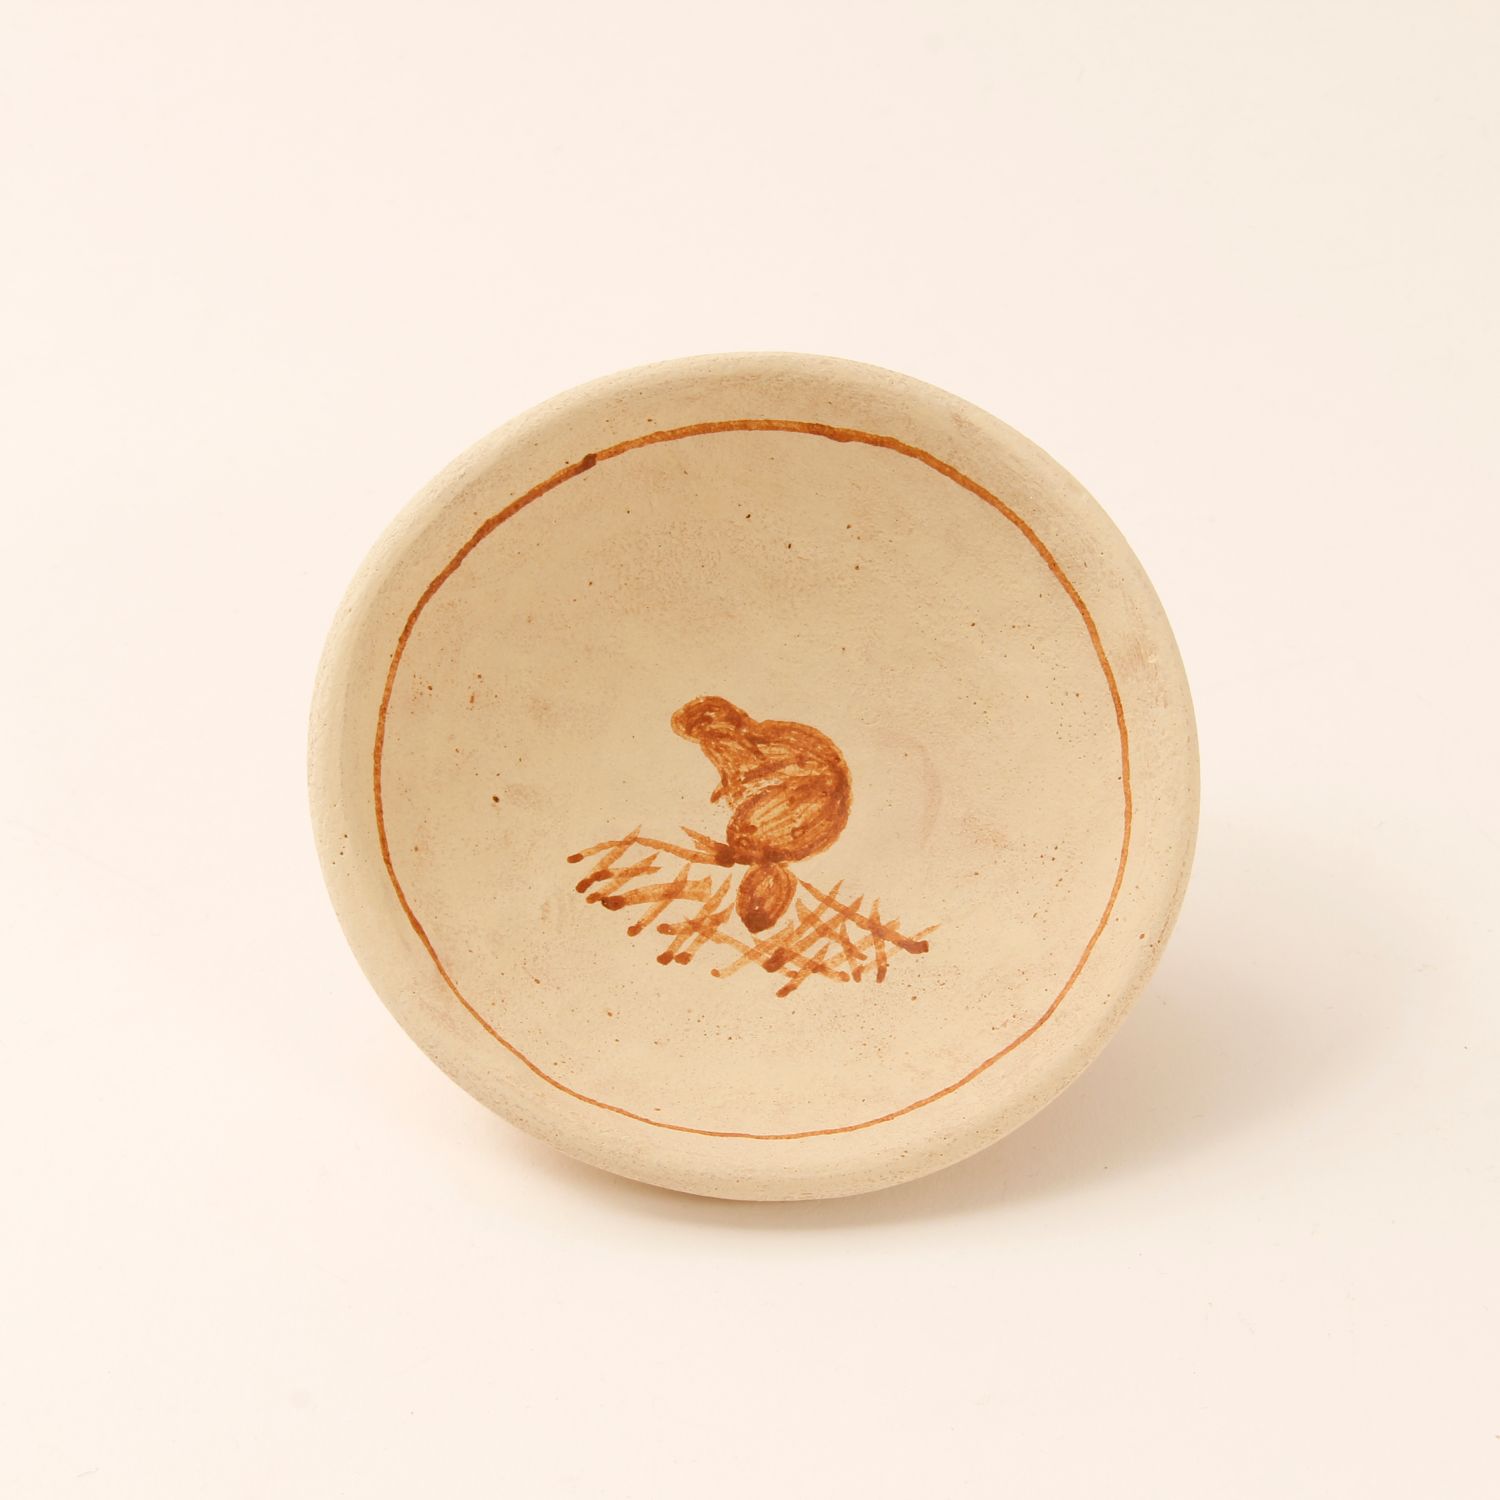 David Migwans: Assorted Beaver Bowl (Each sold separately) Product Image 2 of 2